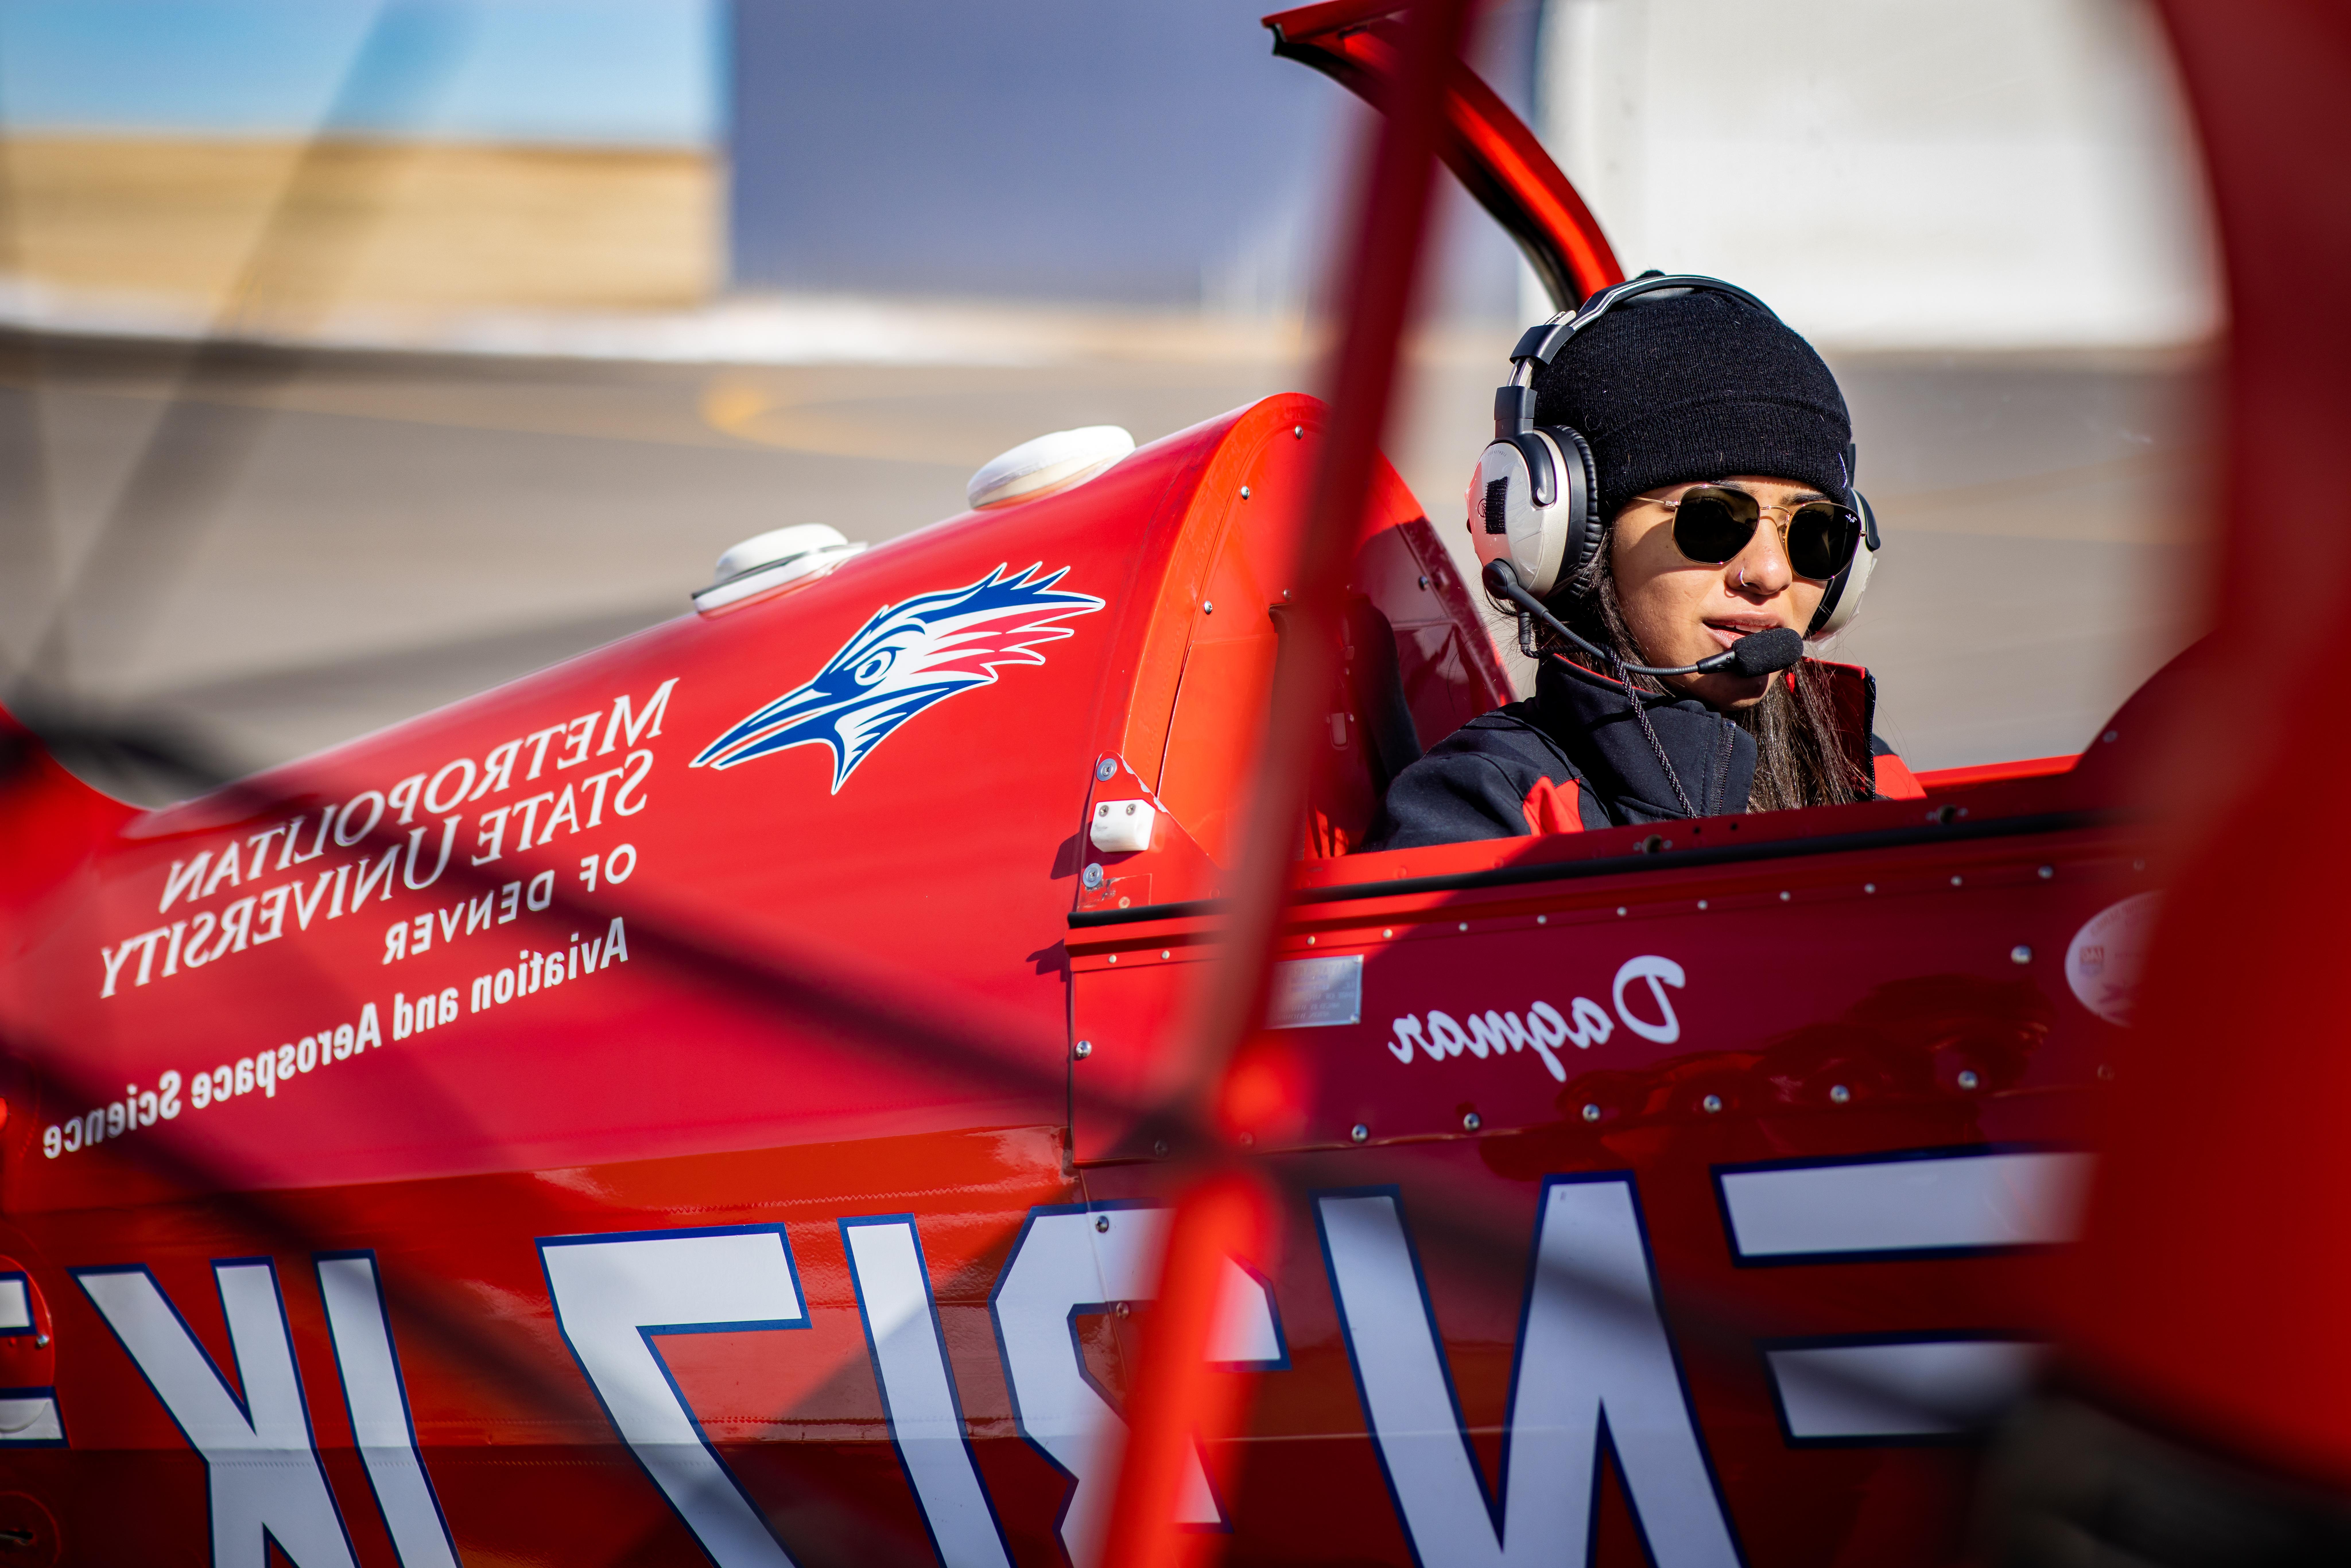 MSU Denver student, Haley Jo Brinson, Bachelor in Aerospace Sciences, major Professional Flight Officer sits in plane in preparation for flight departure on Feb. 12, 2022 at Fort Morgan Municipal Airport. Photo by Alyson McClaran